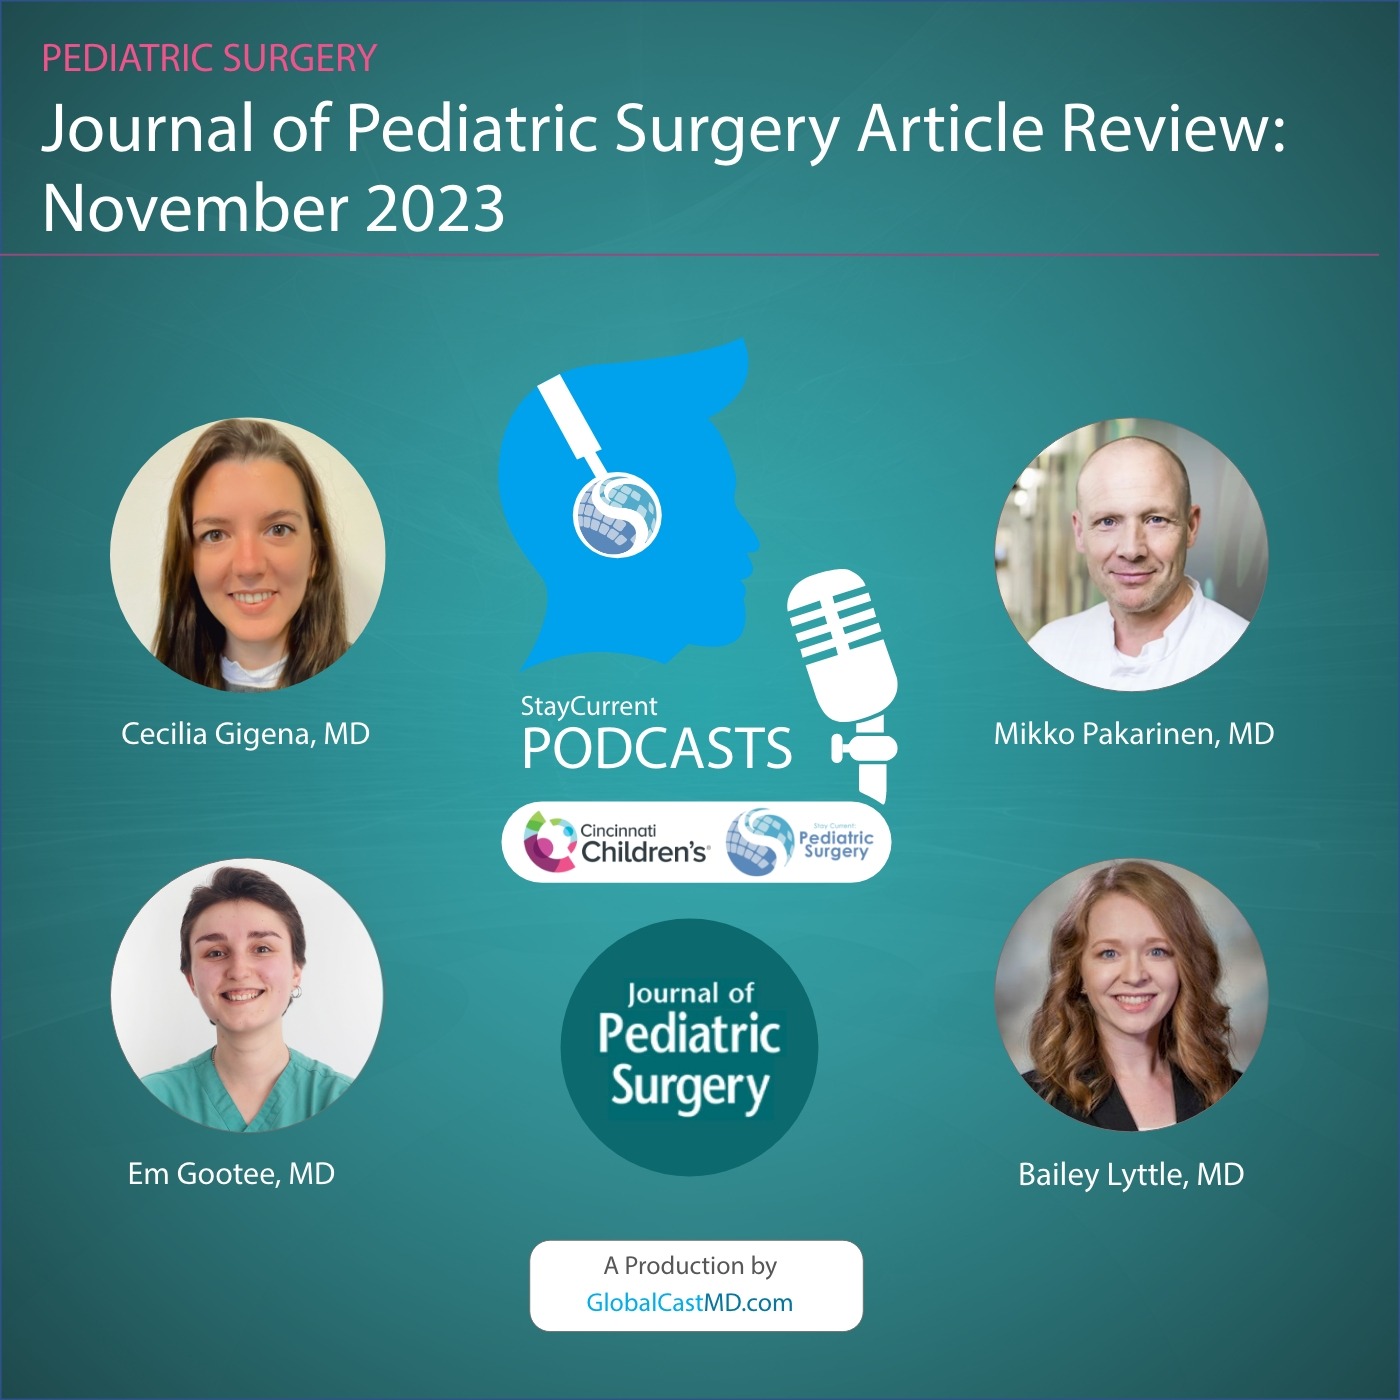 Journal of Pediatric Surgery Article Review: November 2023